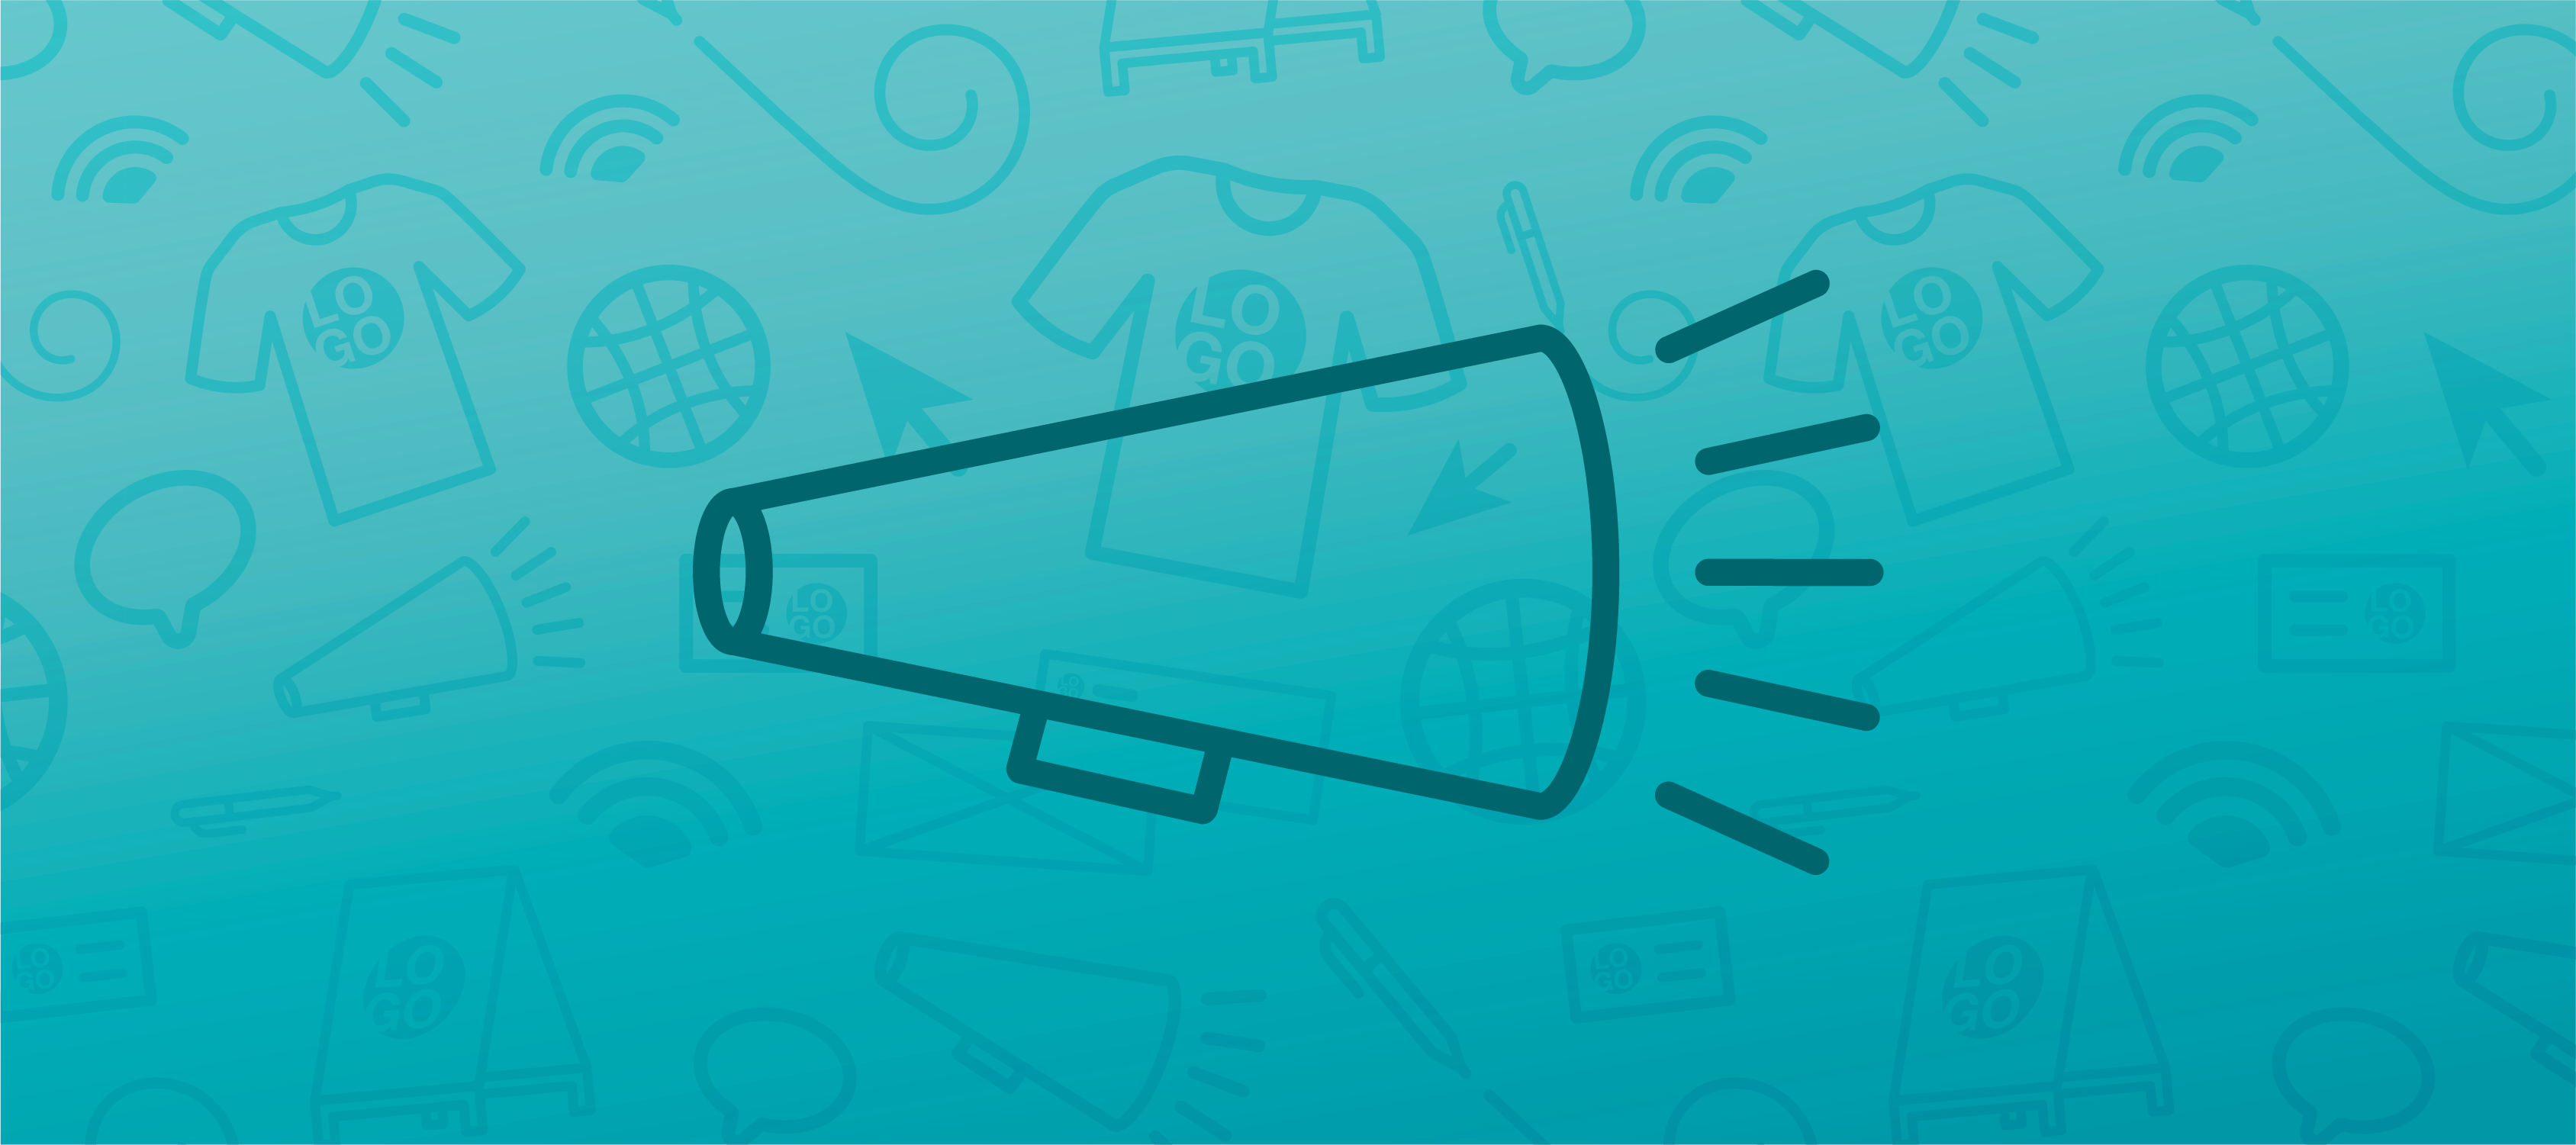 A blue header image featuring an icon of a megaphone in the center and faded marketing icons in the background